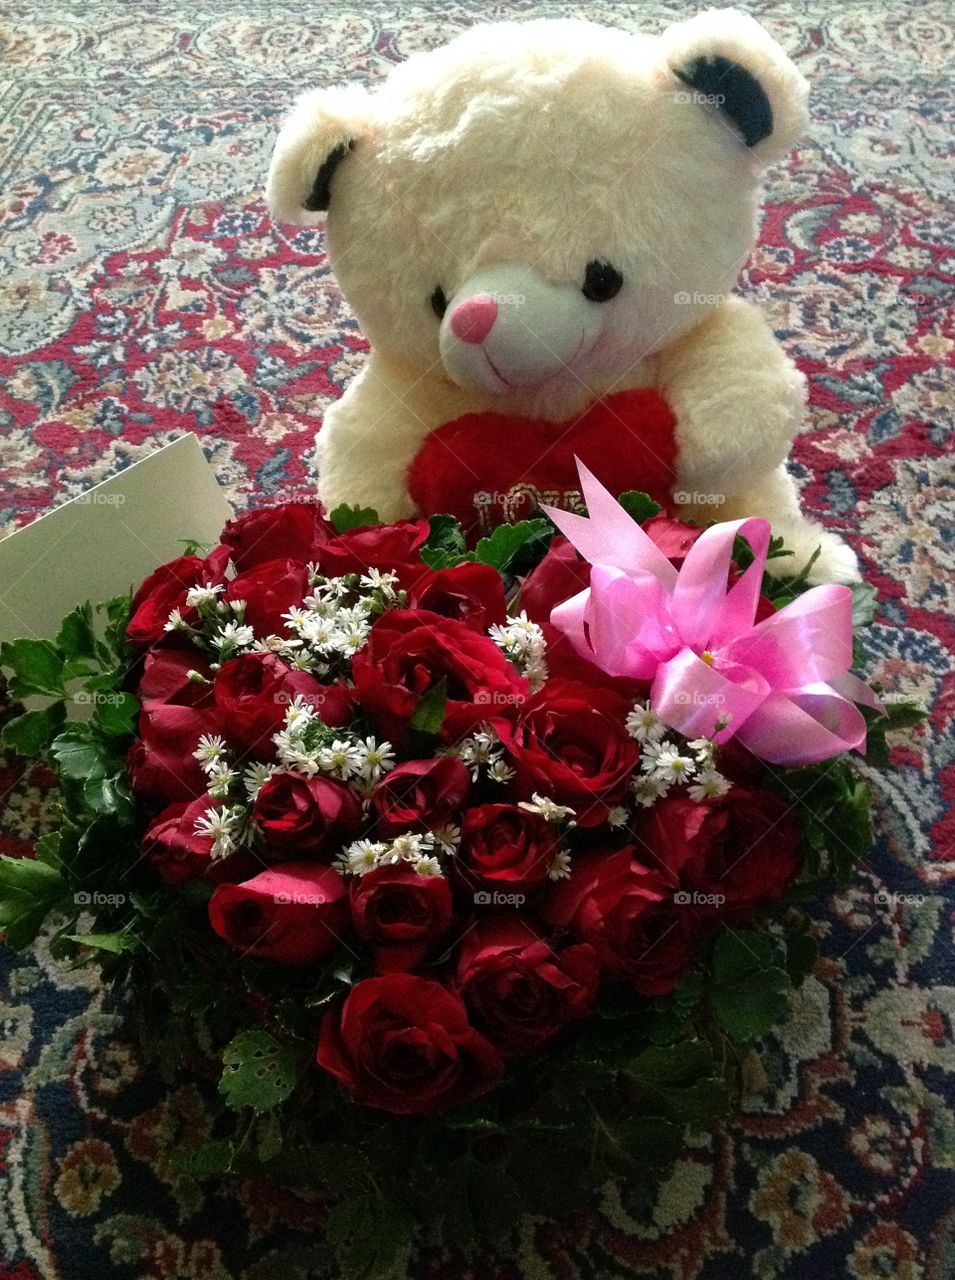 A delivery bear with roses and card.